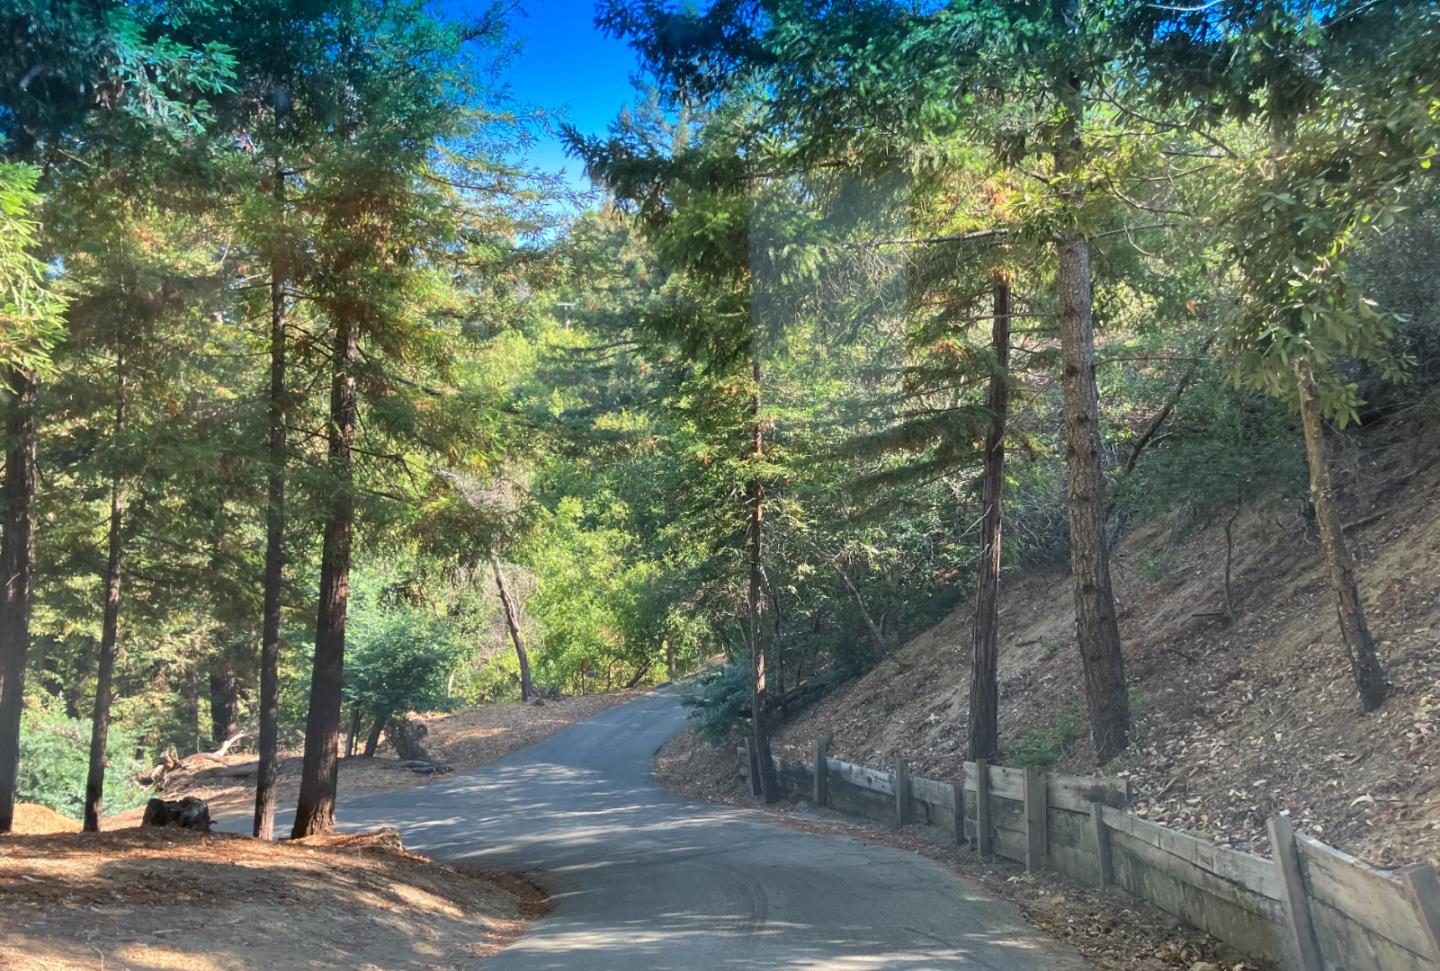 a view of a road with trees